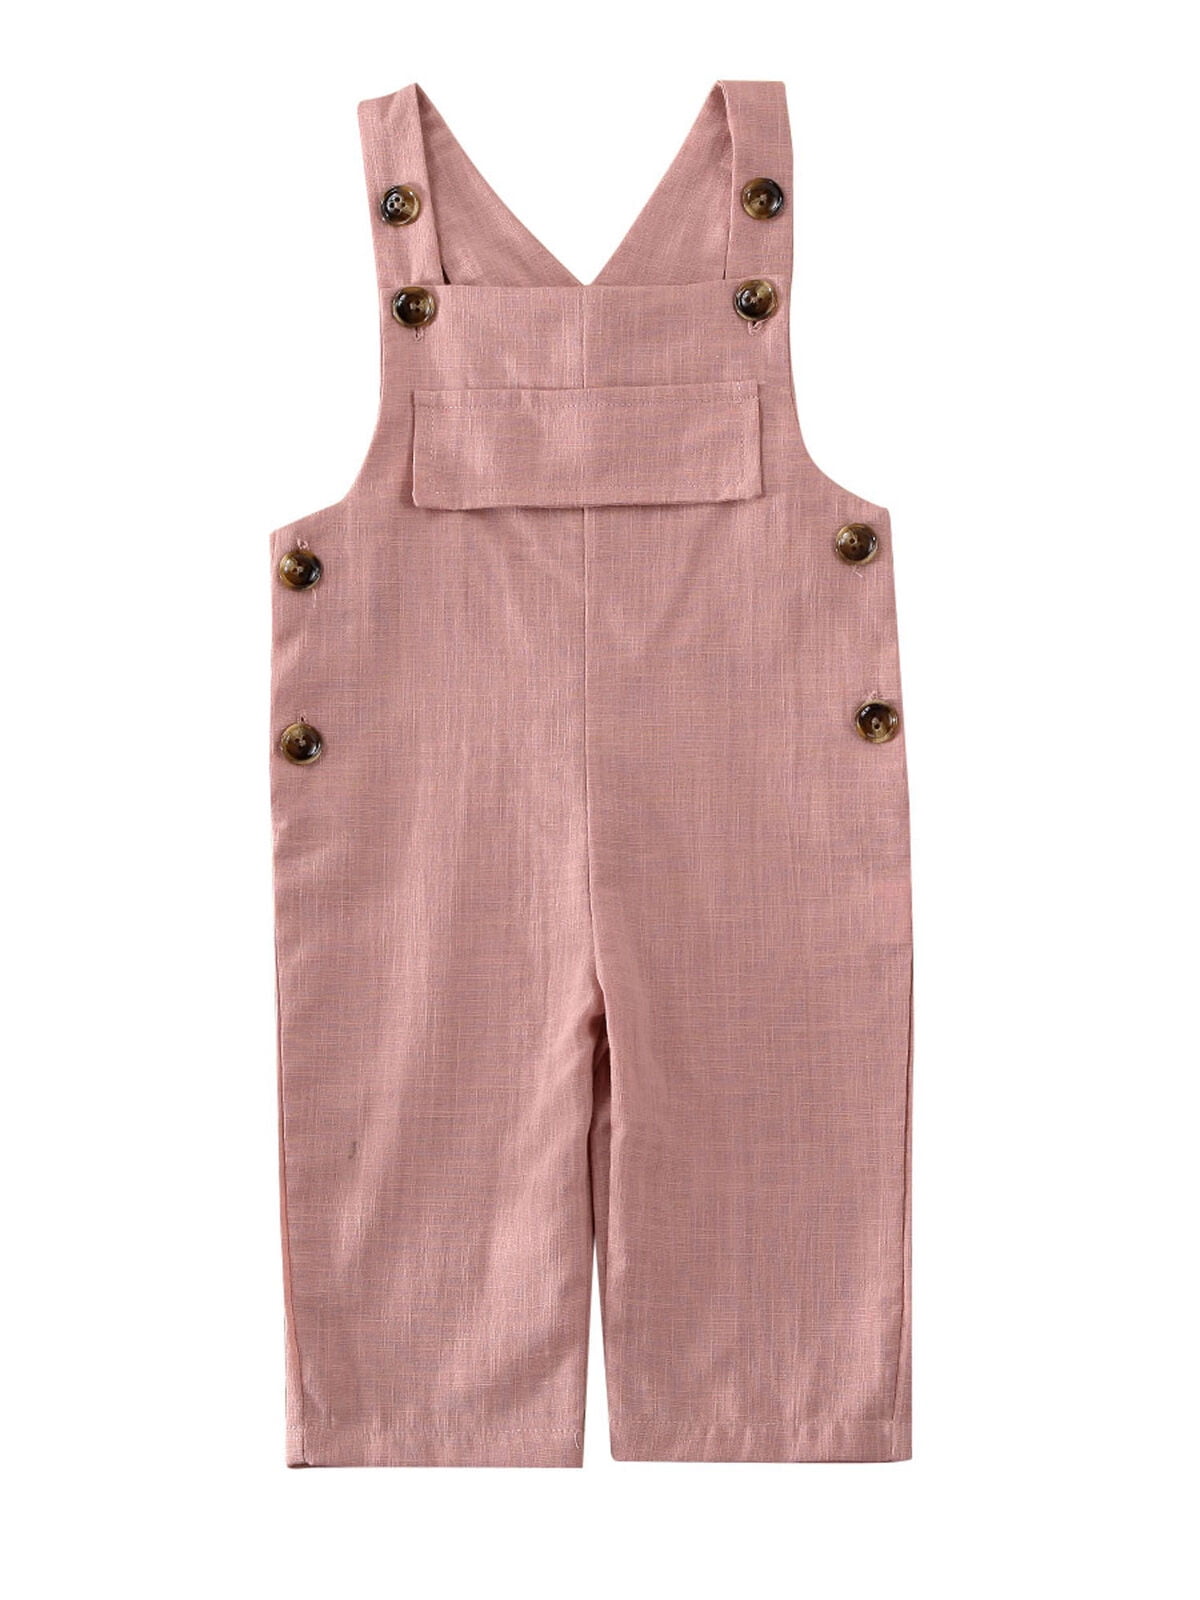 Toddler Infant Baby Boy Girl Dungarees Solid Color Corduroy Suspender Pants with Pockets Fall Winter Clothes